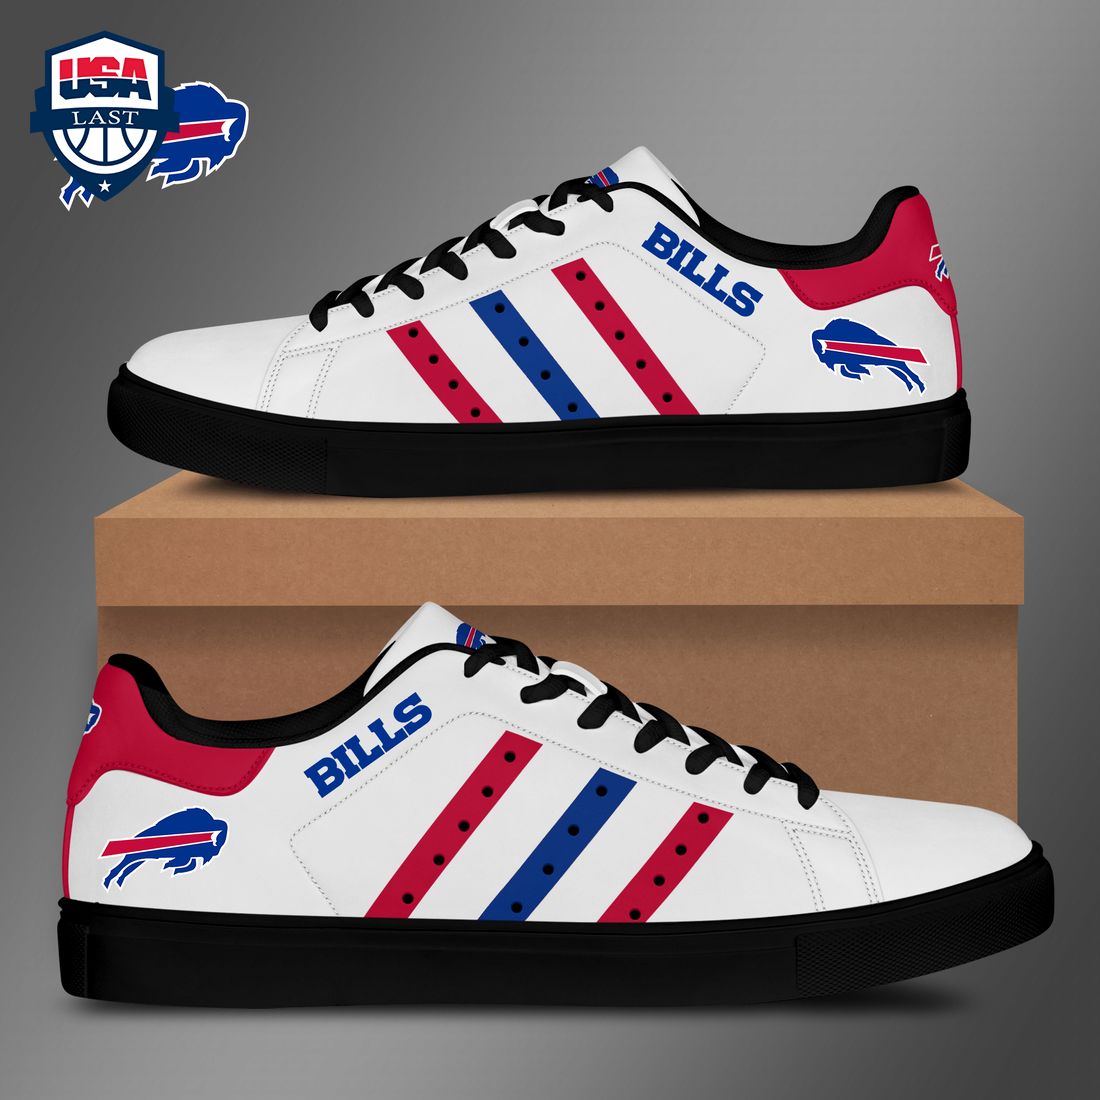 buffalo-bills-red-blue-stripes-stan-smith-low-top-shoes-1-fH7r9.jpg